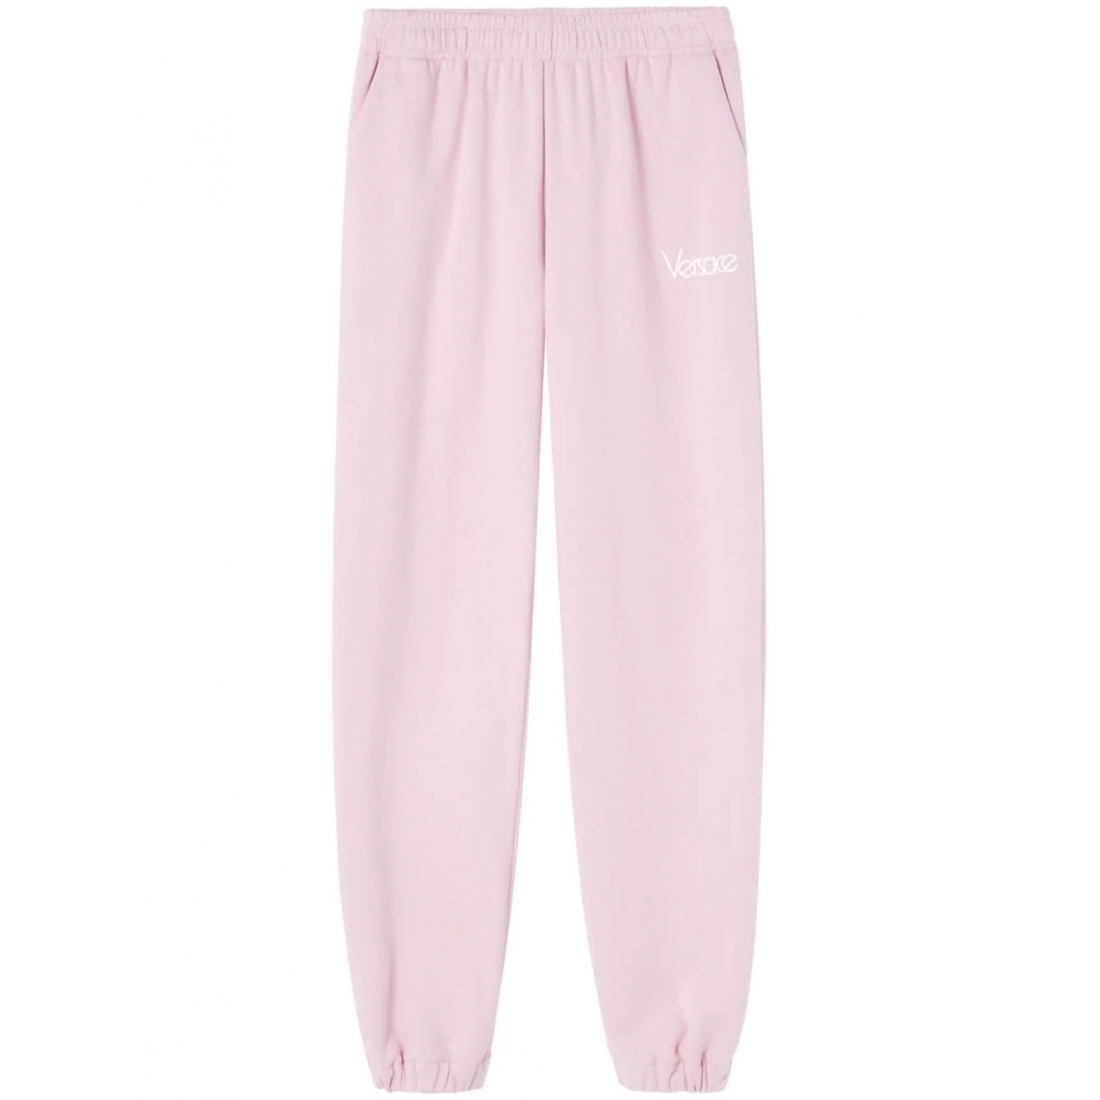 Women's '1980 Re-Edition Embroidered' Sweatpants